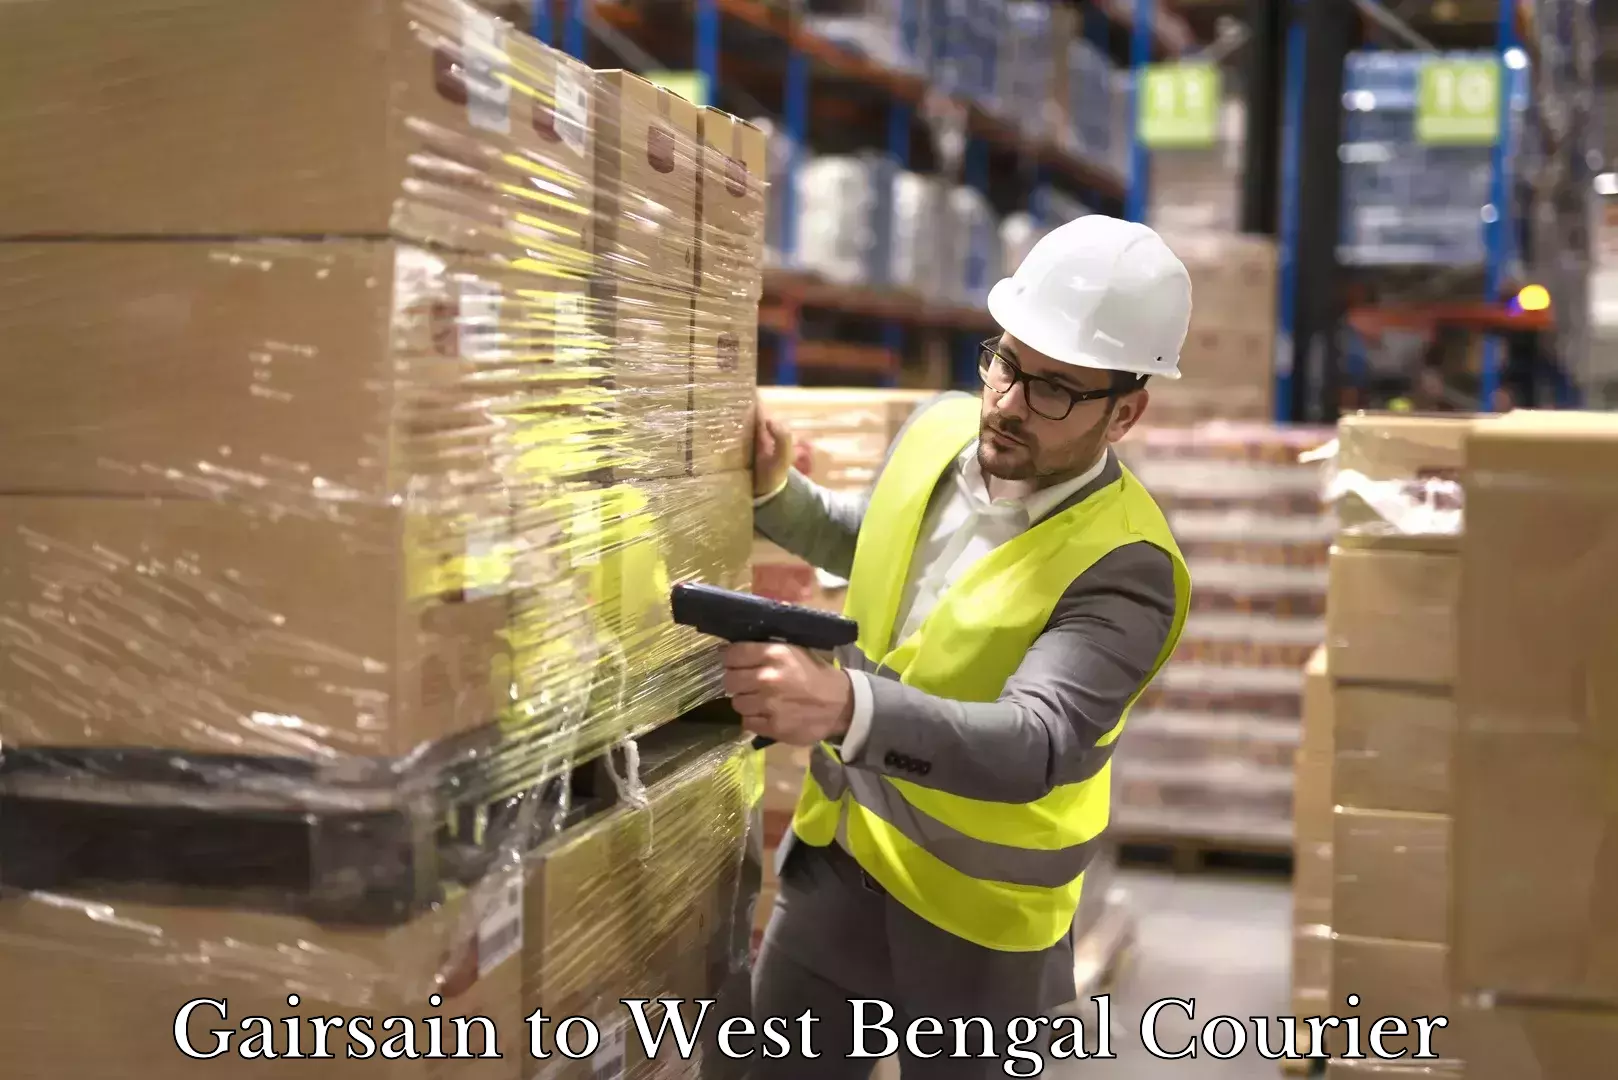 Professional courier handling Gairsain to West Bengal